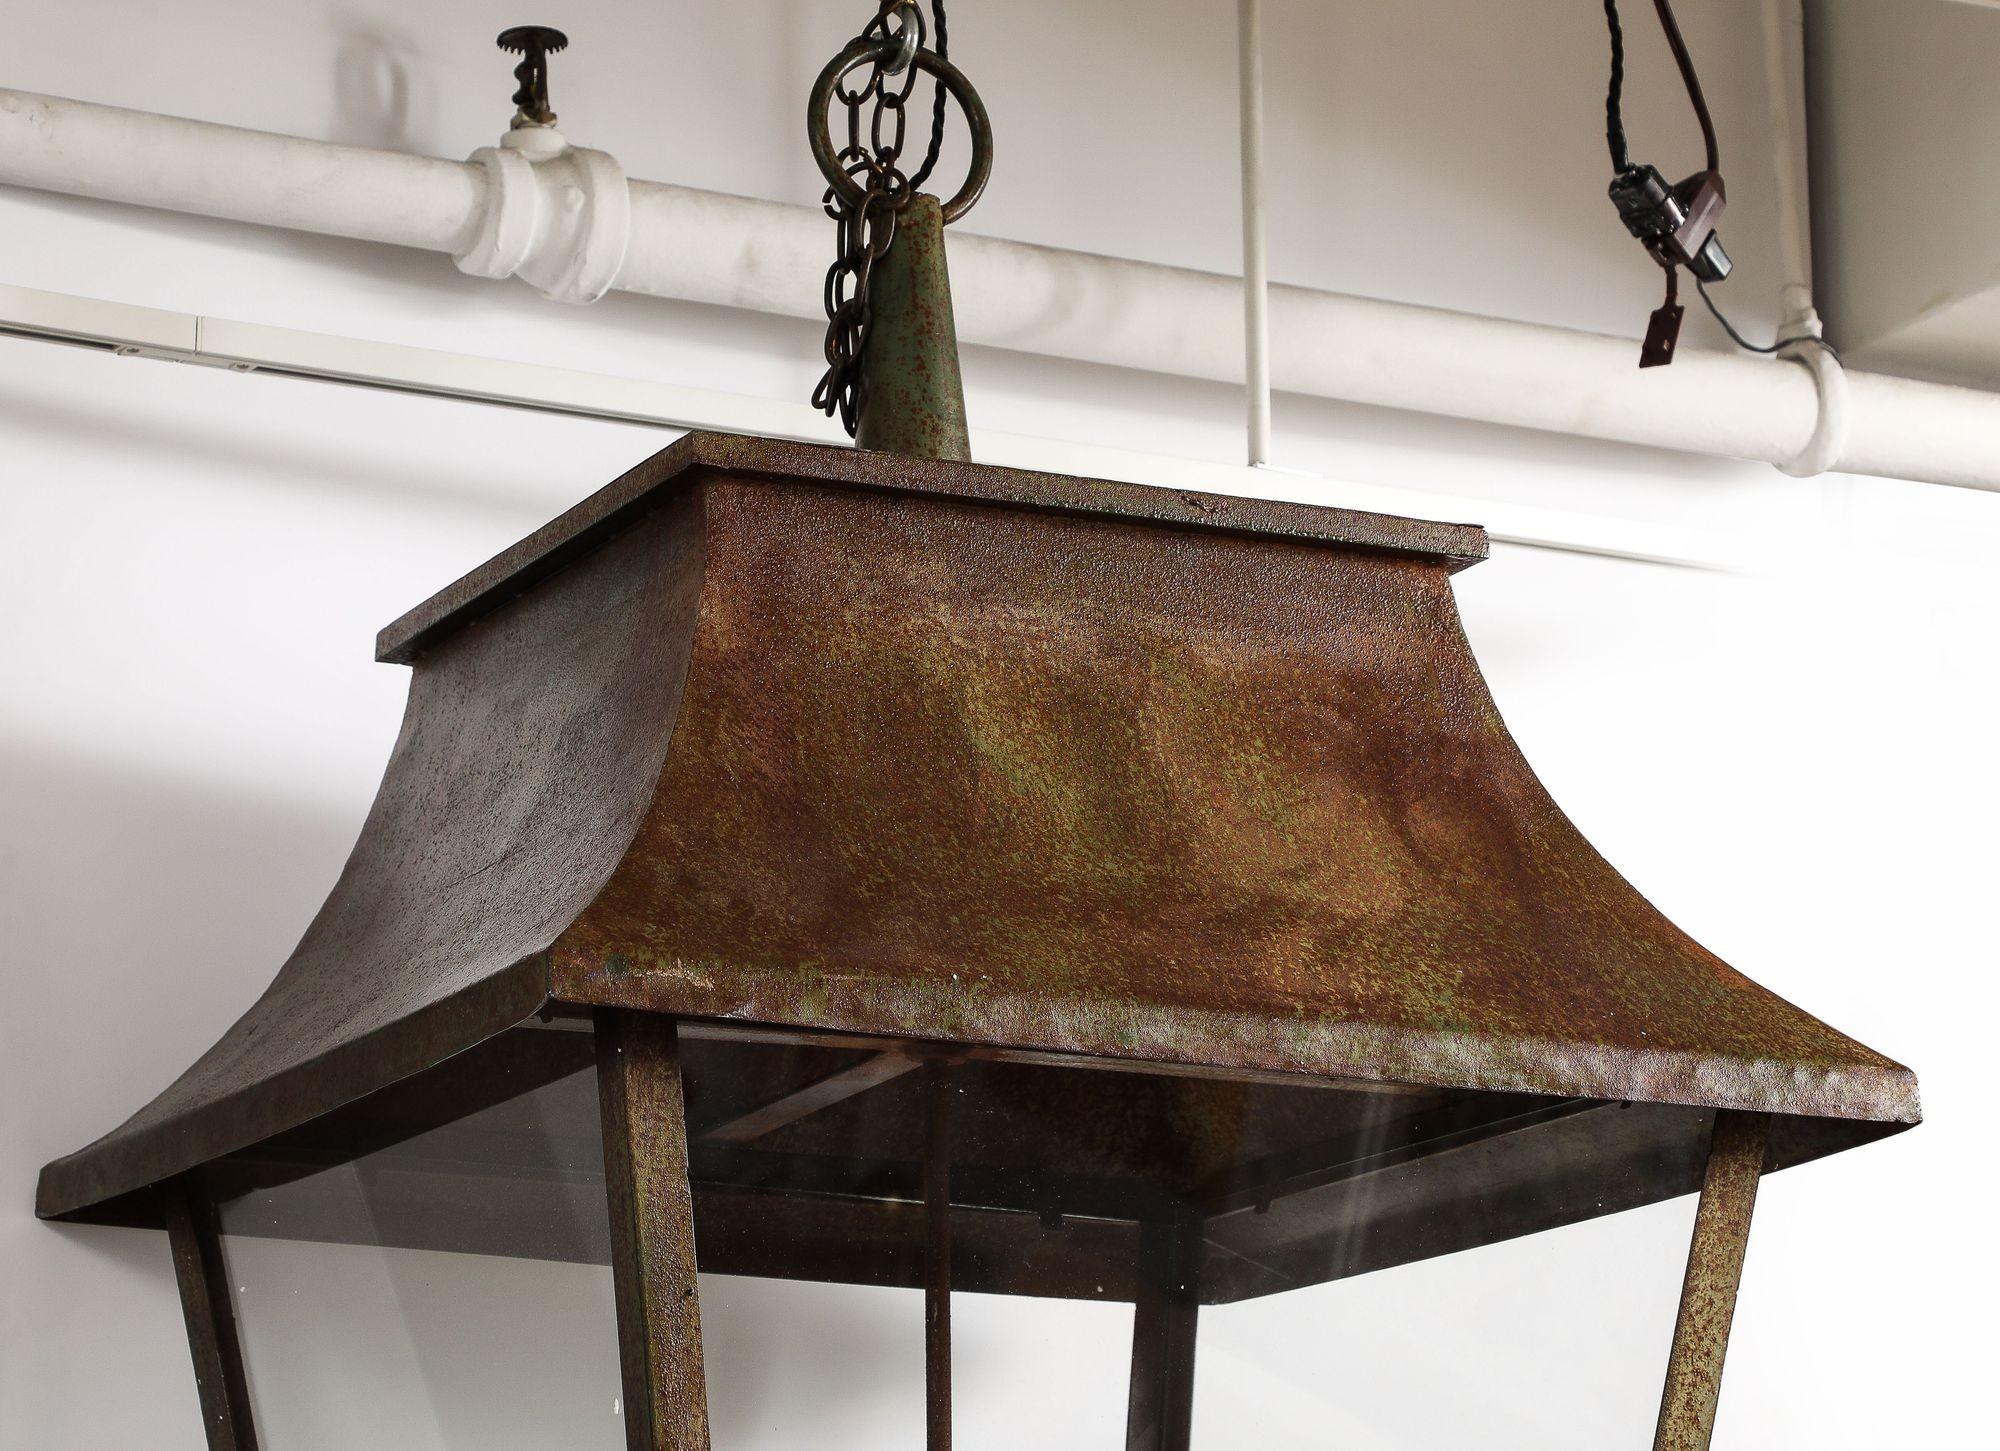 Iron Overscale English Hall or Stable Lantern